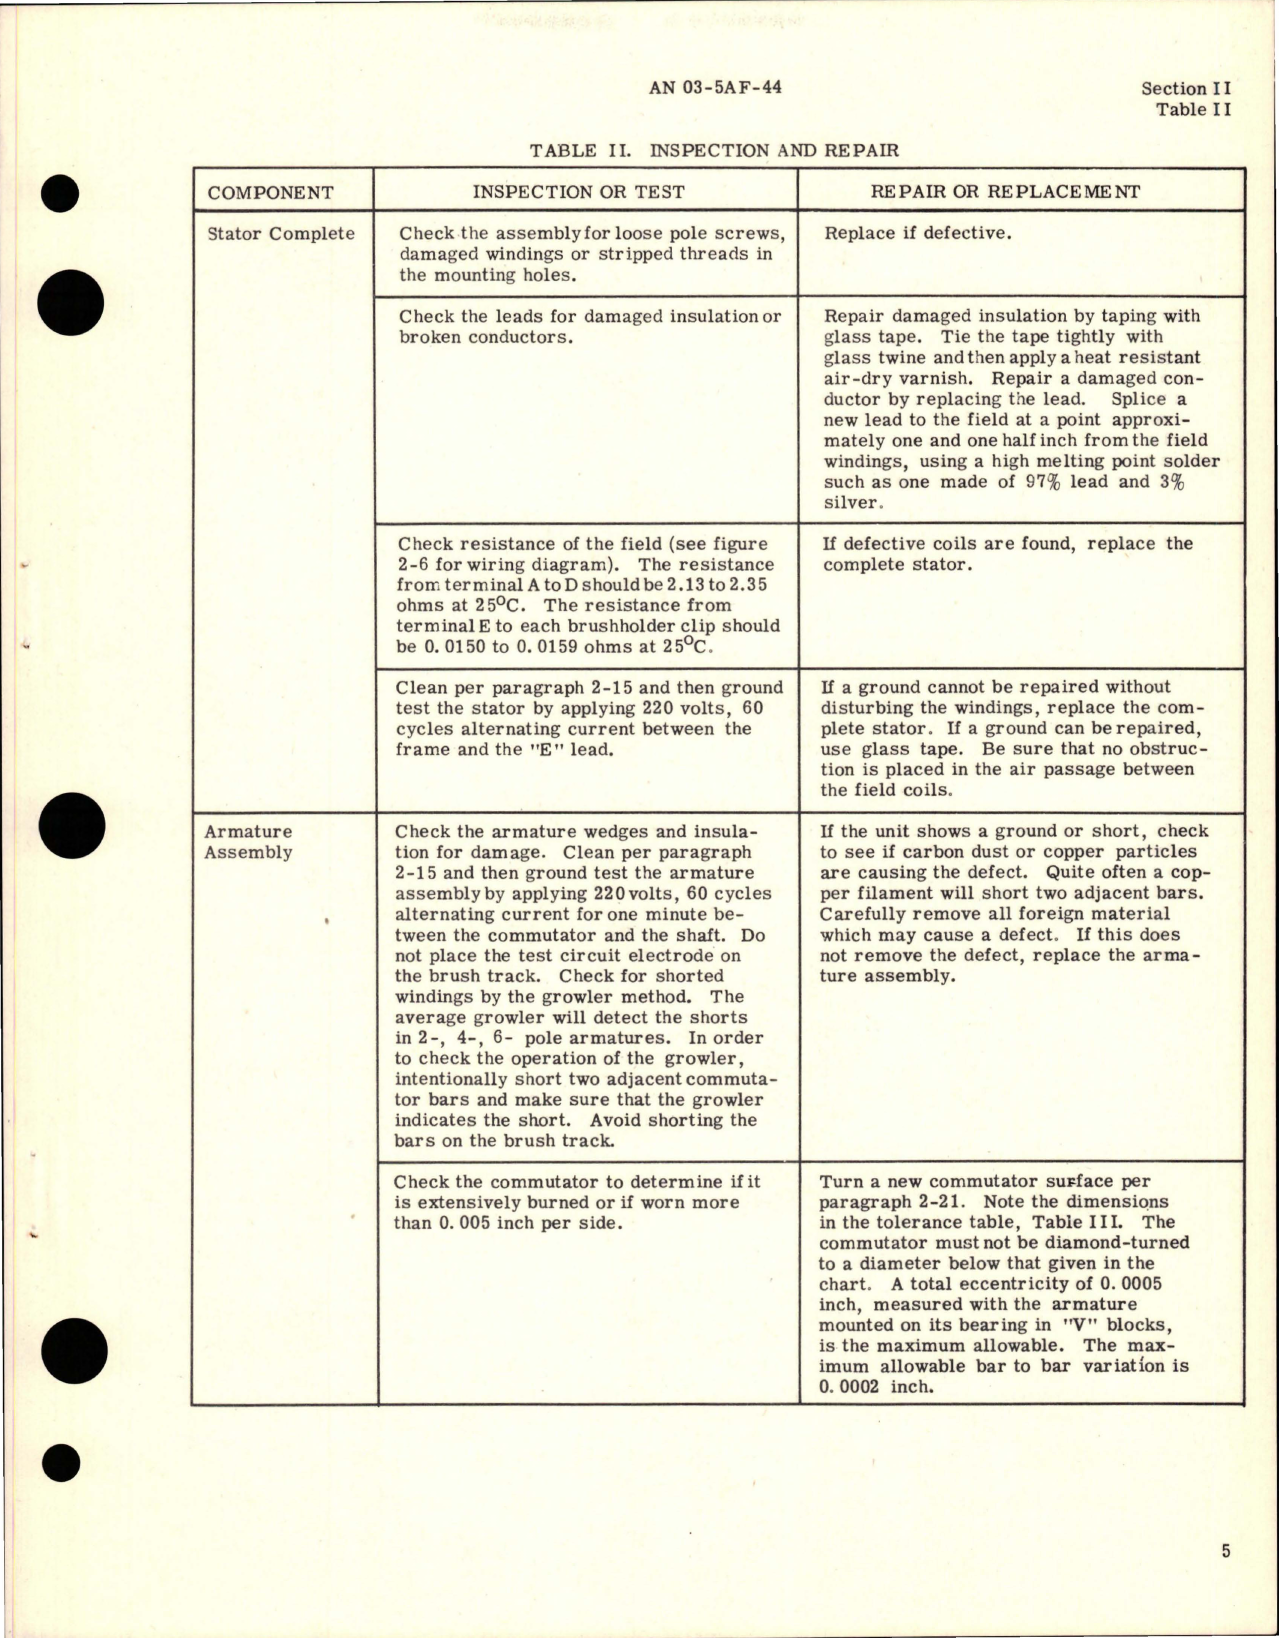 Sample page 7 from AirCorps Library document: Overhaul Instructions for DC-30 Generator - Part A19A6161 